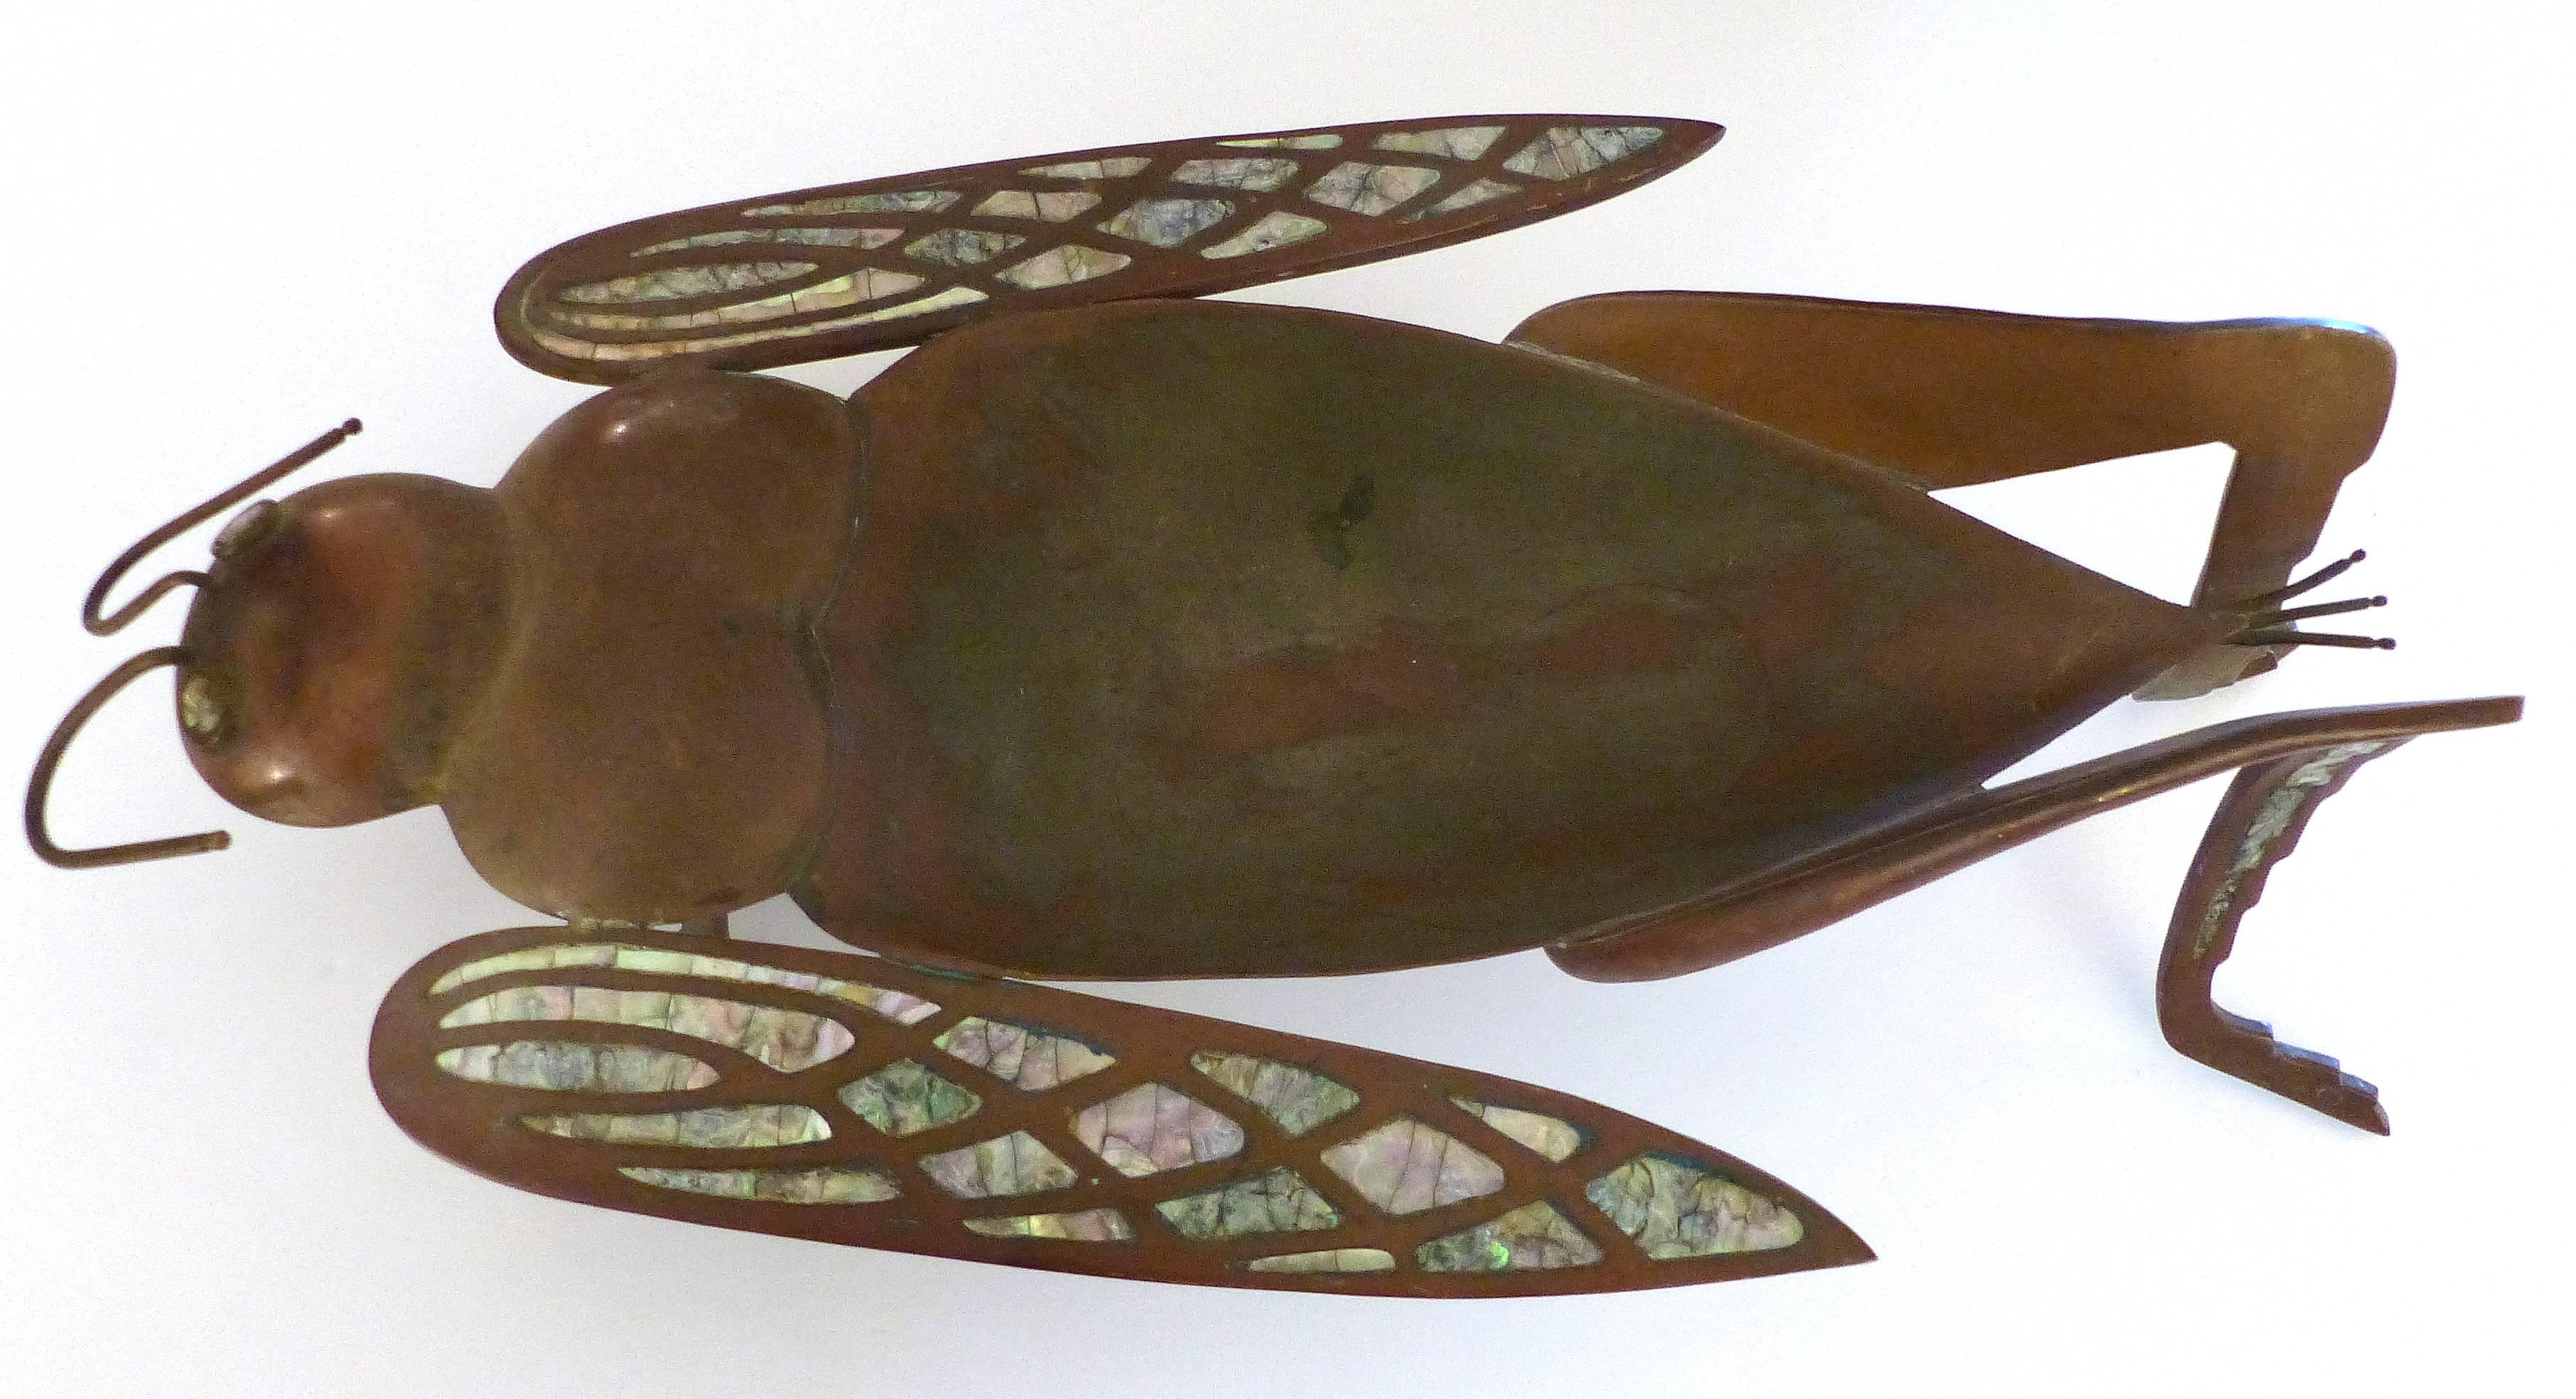 Los Castillo Brass, Copper and Abalone Dish attributed to Salvador Teran

Offered for sale is a brass, copper and abalone dish in the form of a whimsical grasshopper. Unmarked but attributed to Salvador Teran from the period when he worked in the